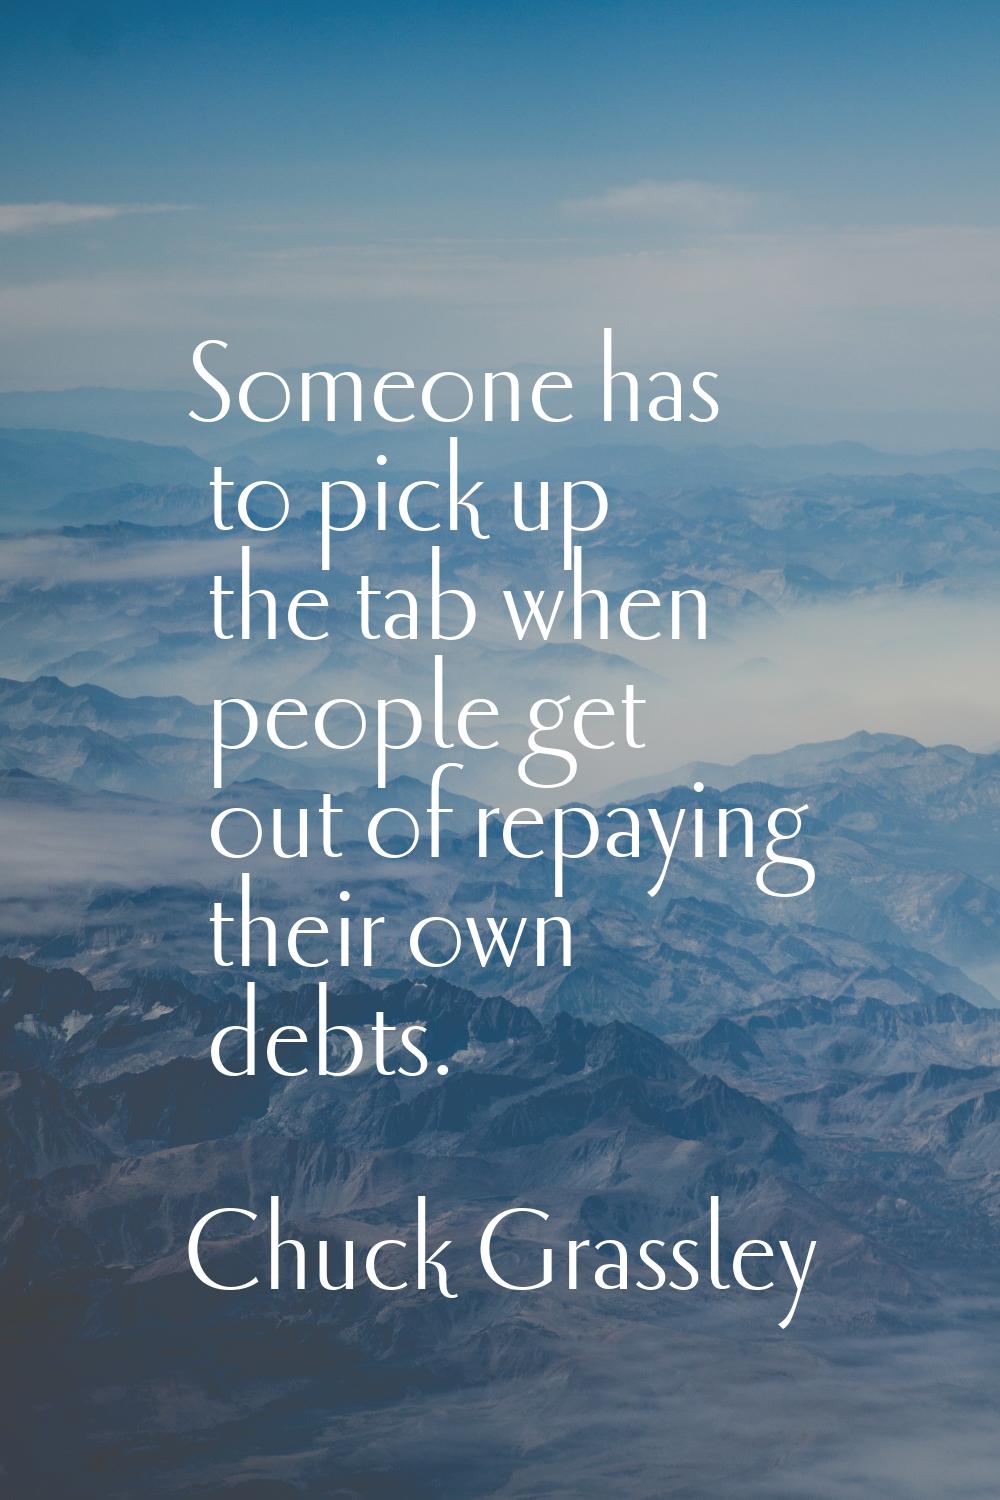 Someone has to pick up the tab when people get out of repaying their own debts.